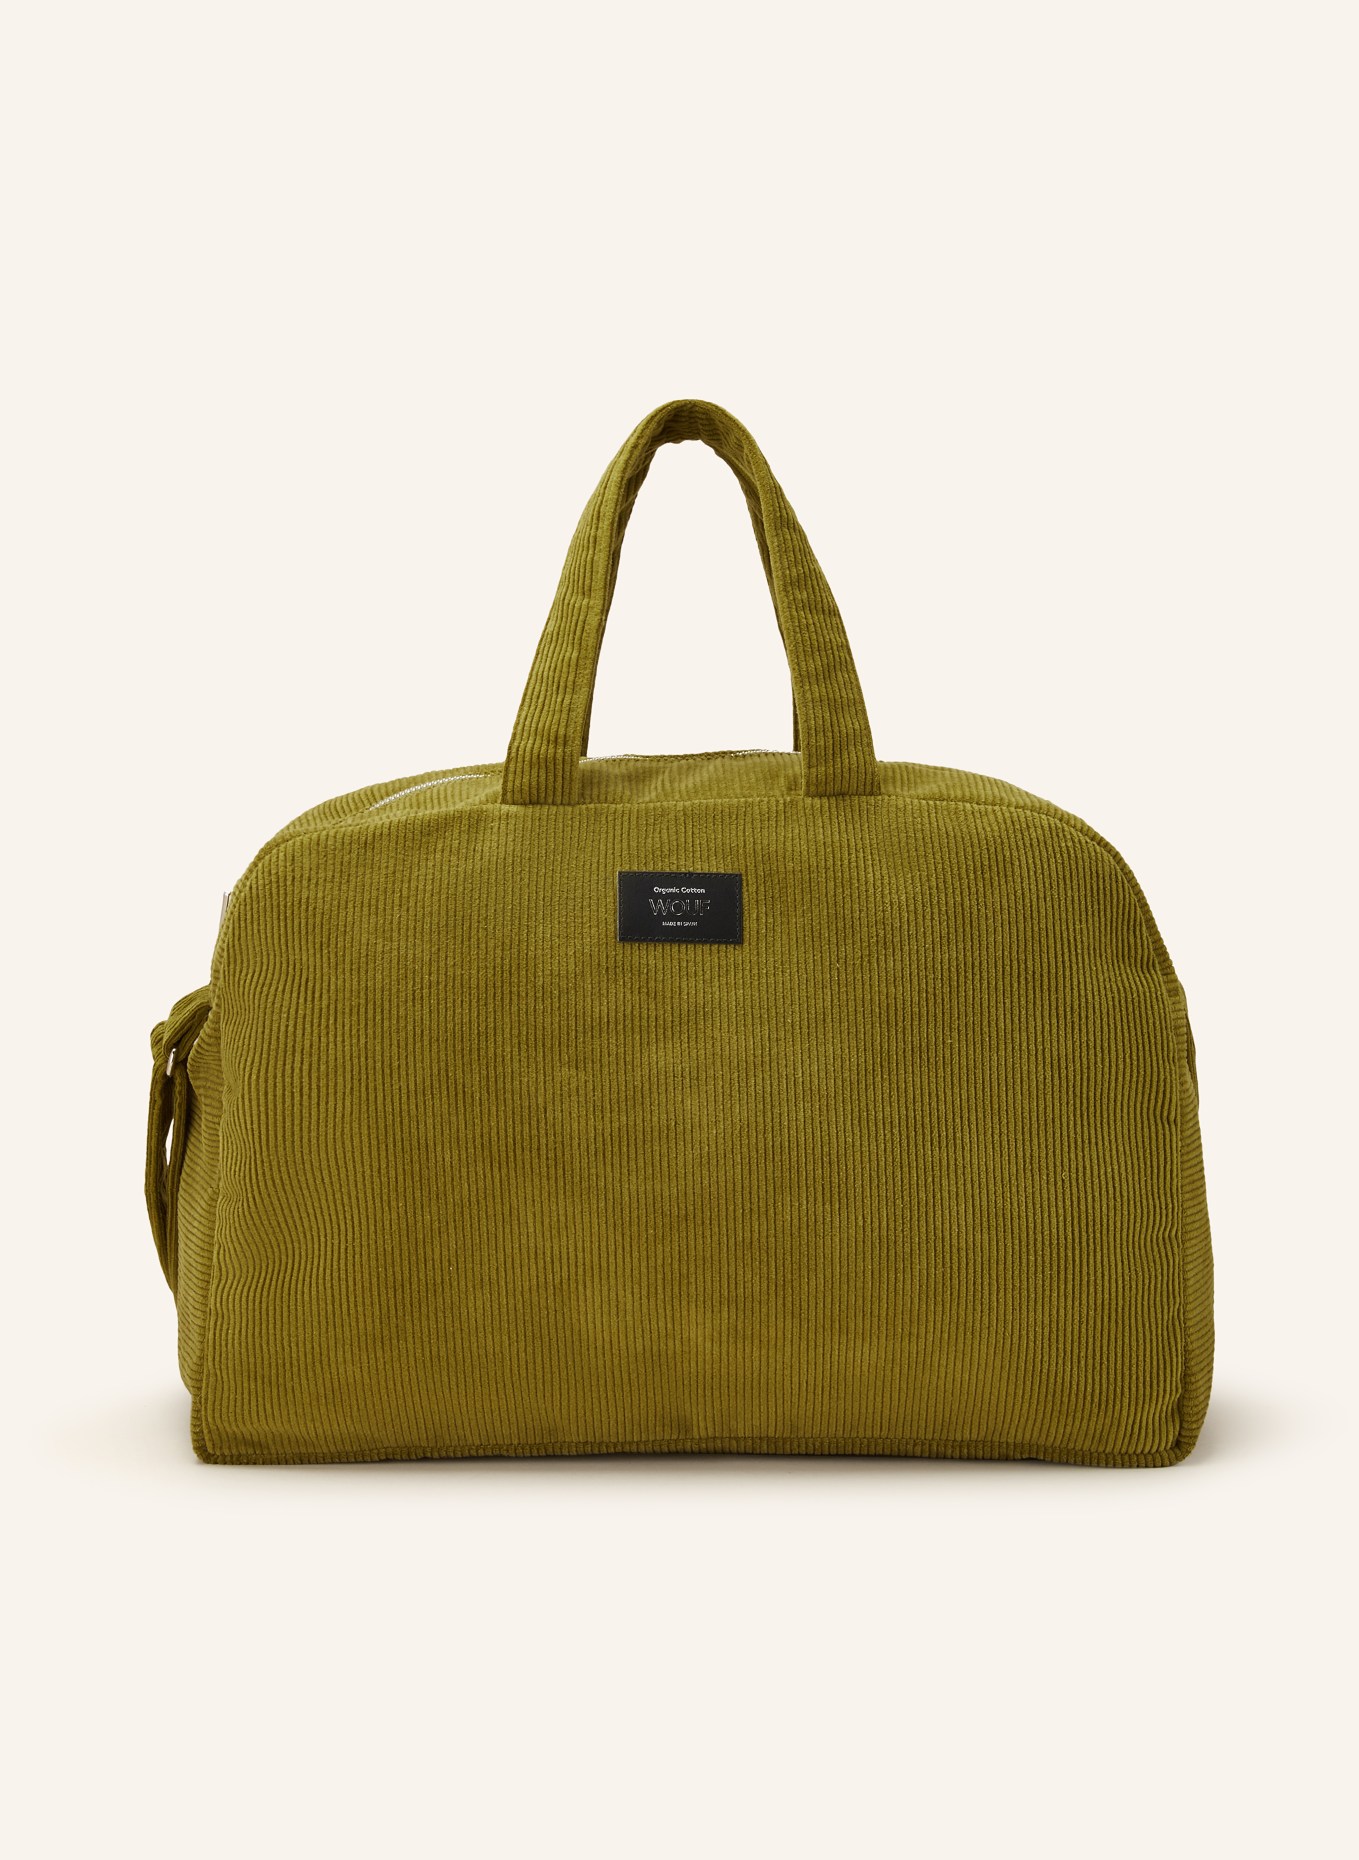 WOUF Weekend bag OLIVE made of corduroy, Color: OLIVE (Image 1)